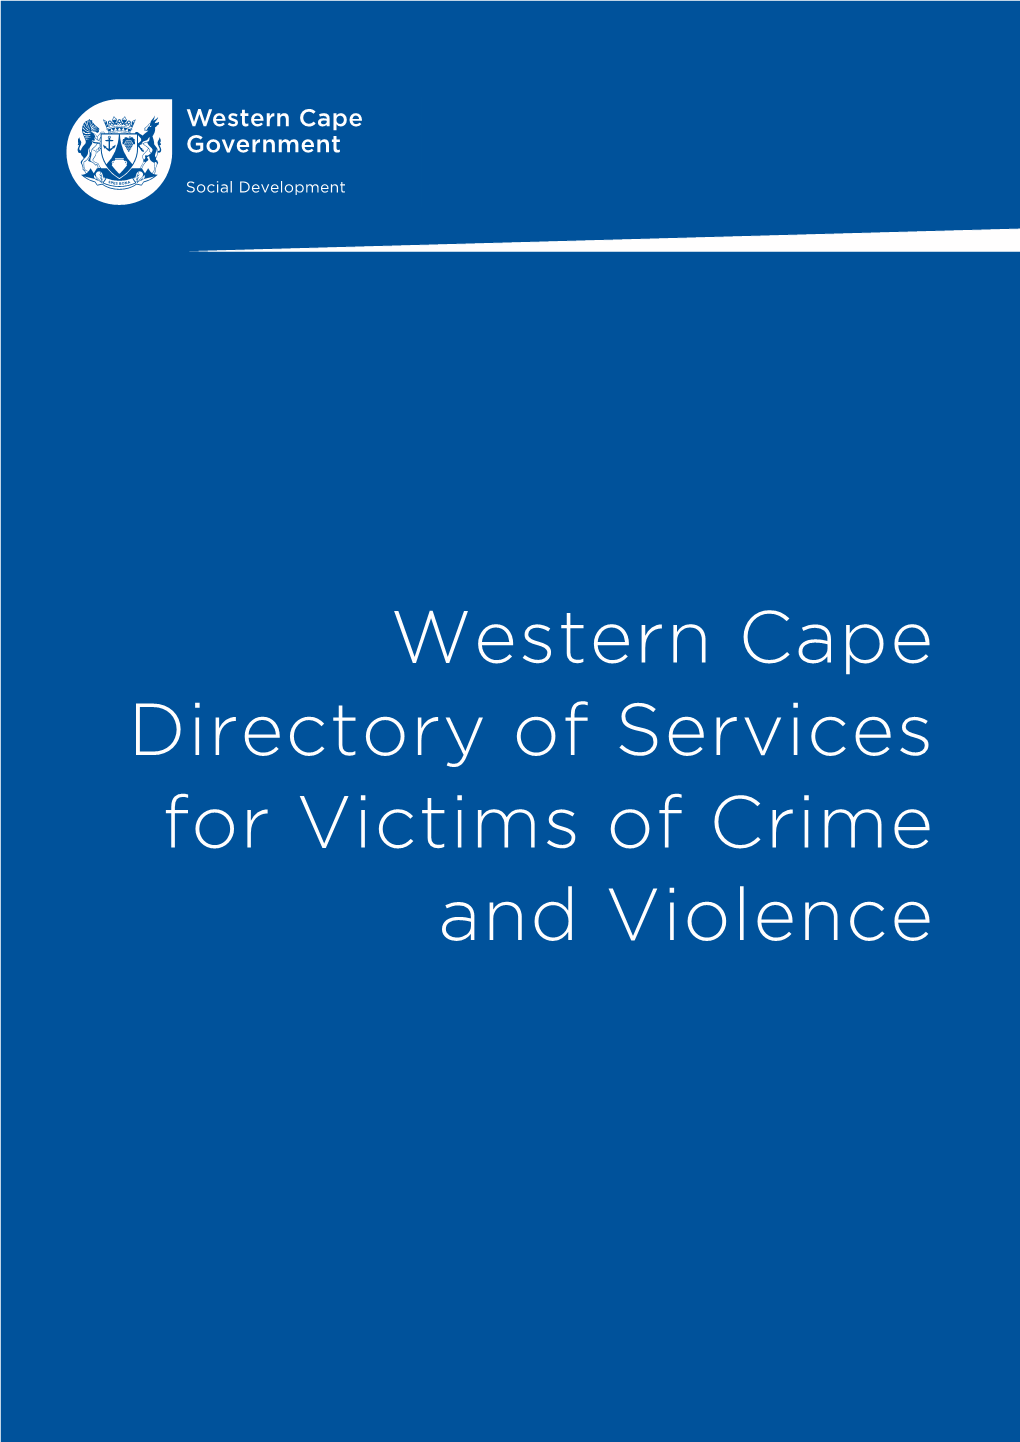 Western Cape Directory of Services for Victims of Crime and Violence